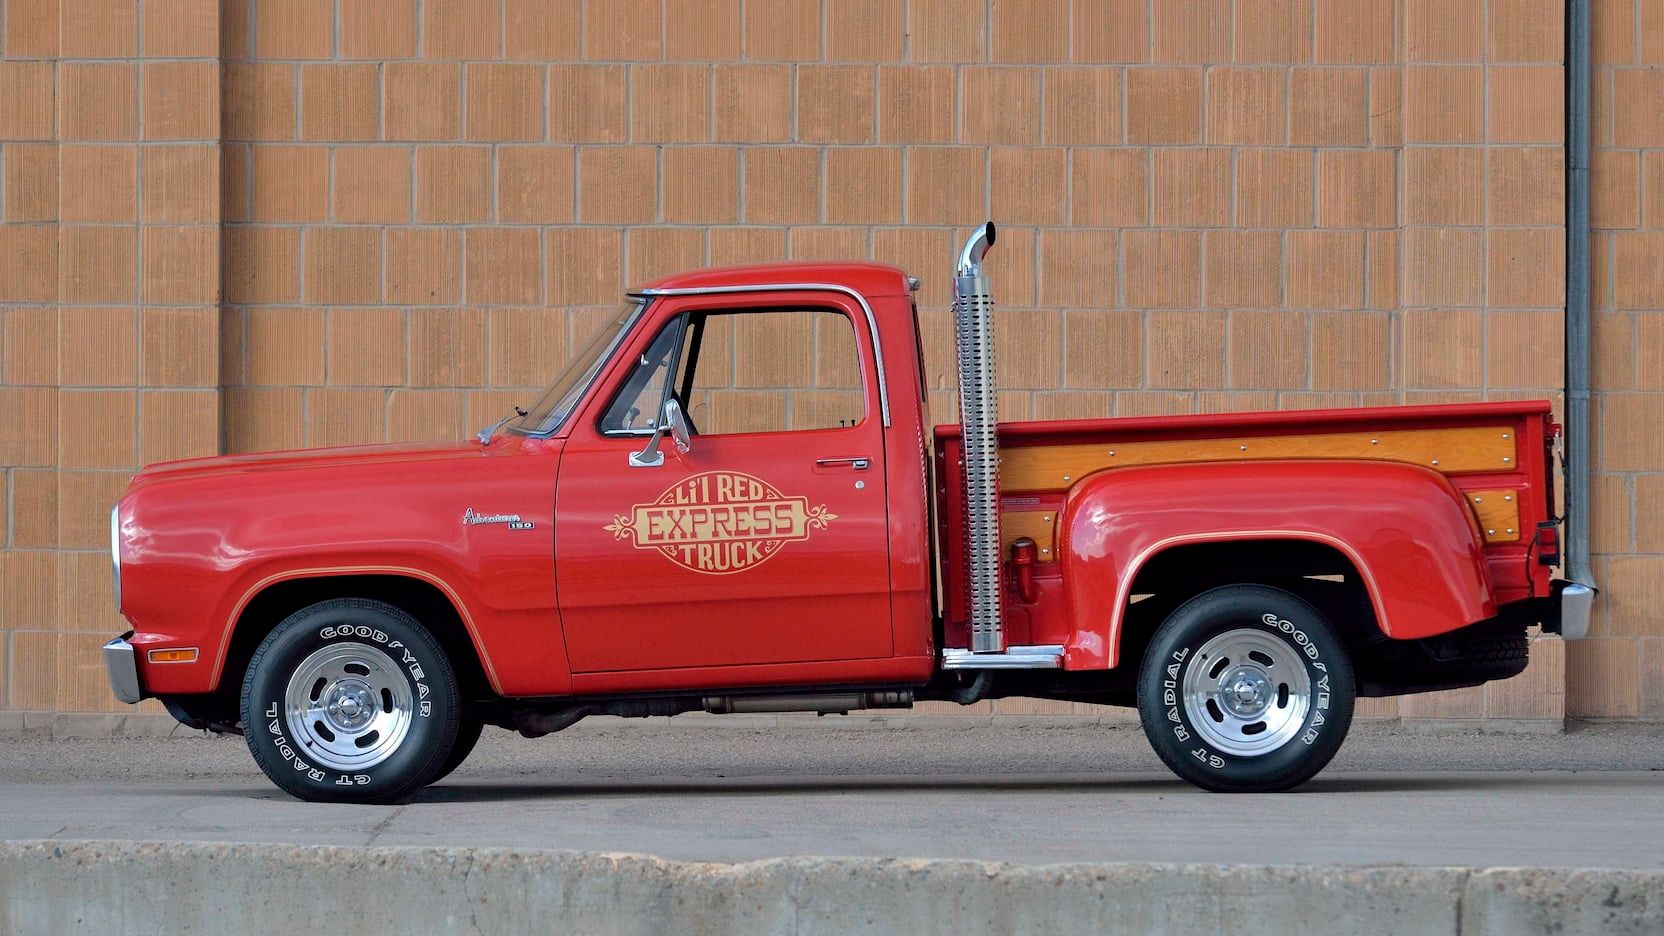 A parked 1979 Dodge Lil Red Express